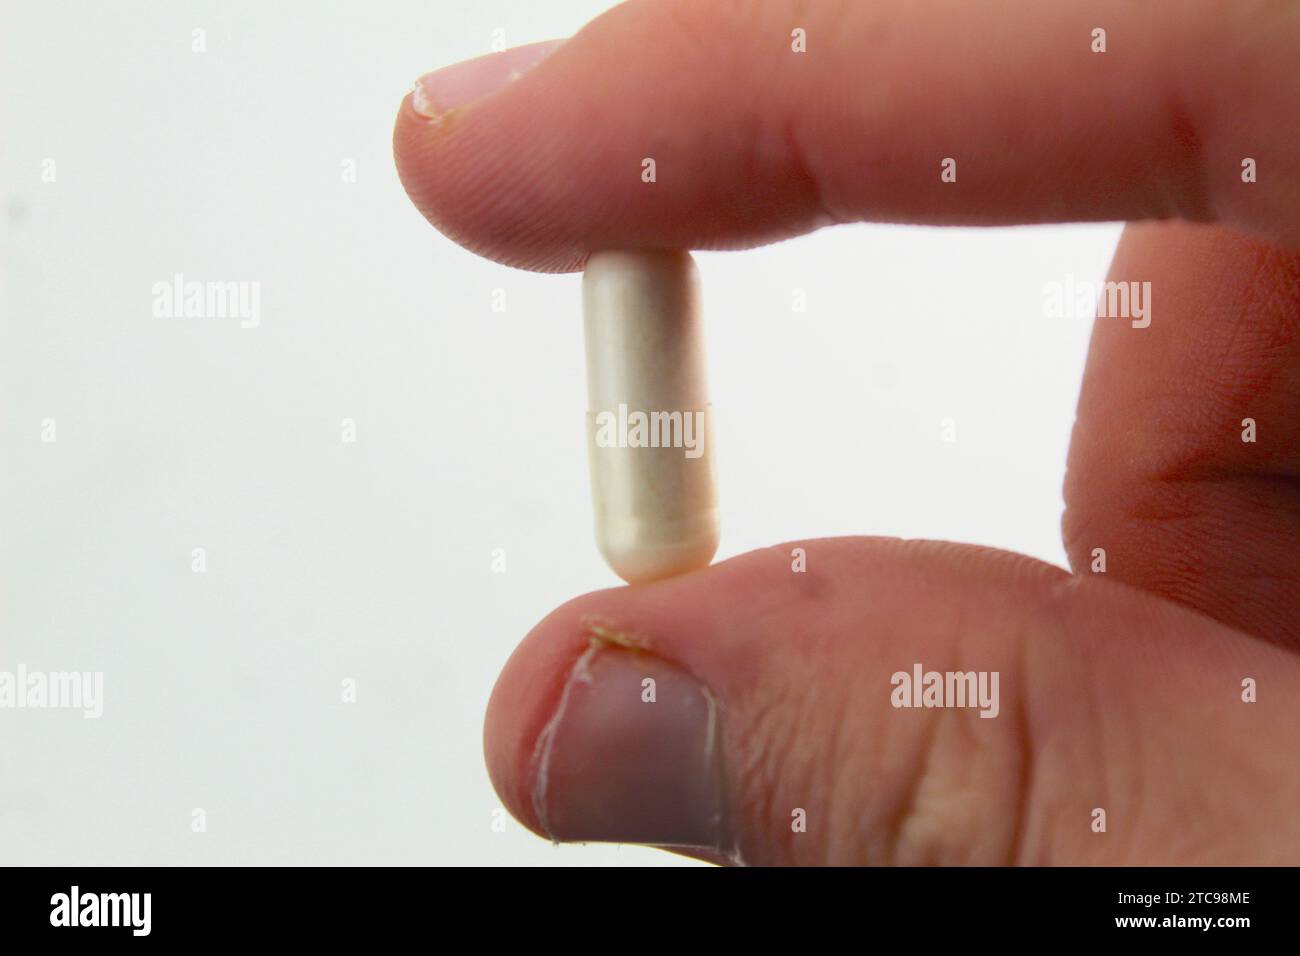 A close up photo of a person holding a white pill between their two fingers. Stock Photo